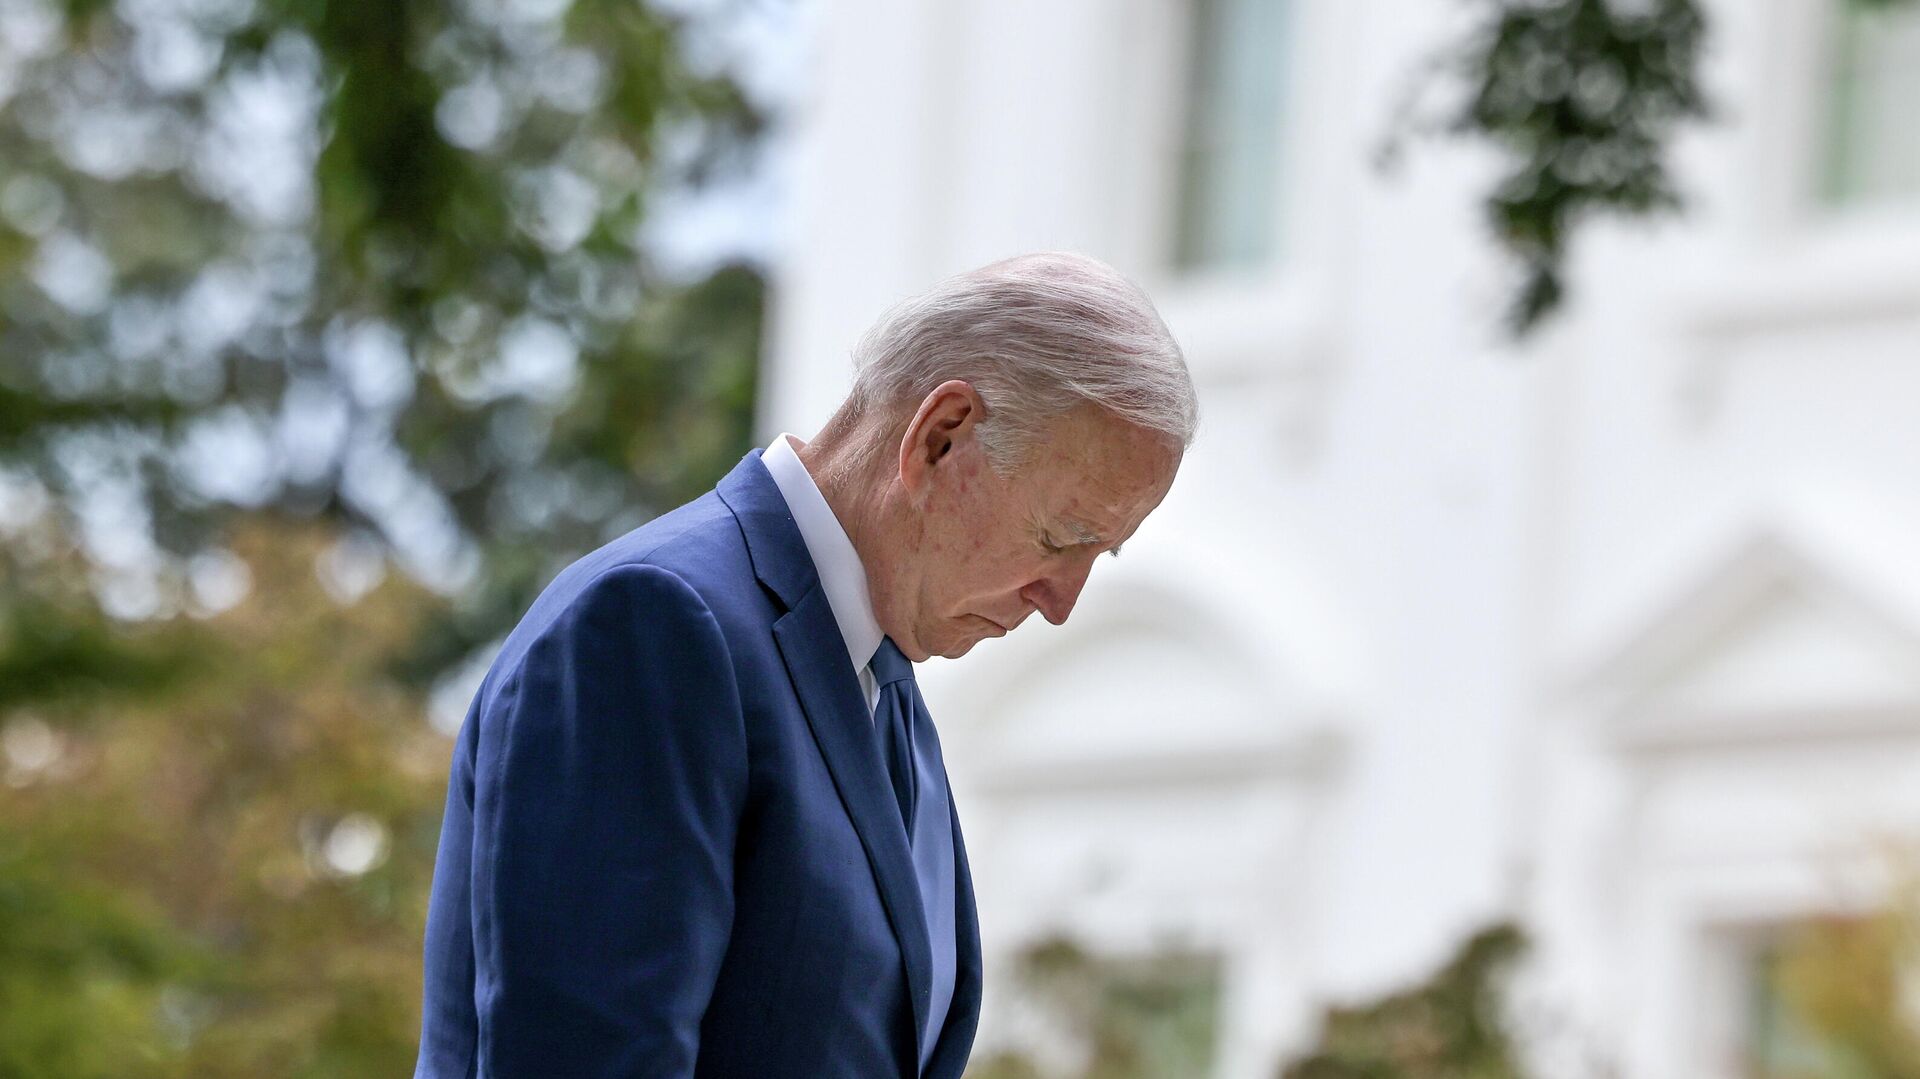 U.S. President Joe Biden lowers his head before he delivers remarks at a proclamation signing to restore protections for Bears Ears and Grand Staircase-Escalante National Monument in Washington, U.S., October 8, 2021. REUTERS/Evelyn Hockstein - Sputnik International, 1920, 31.10.2021